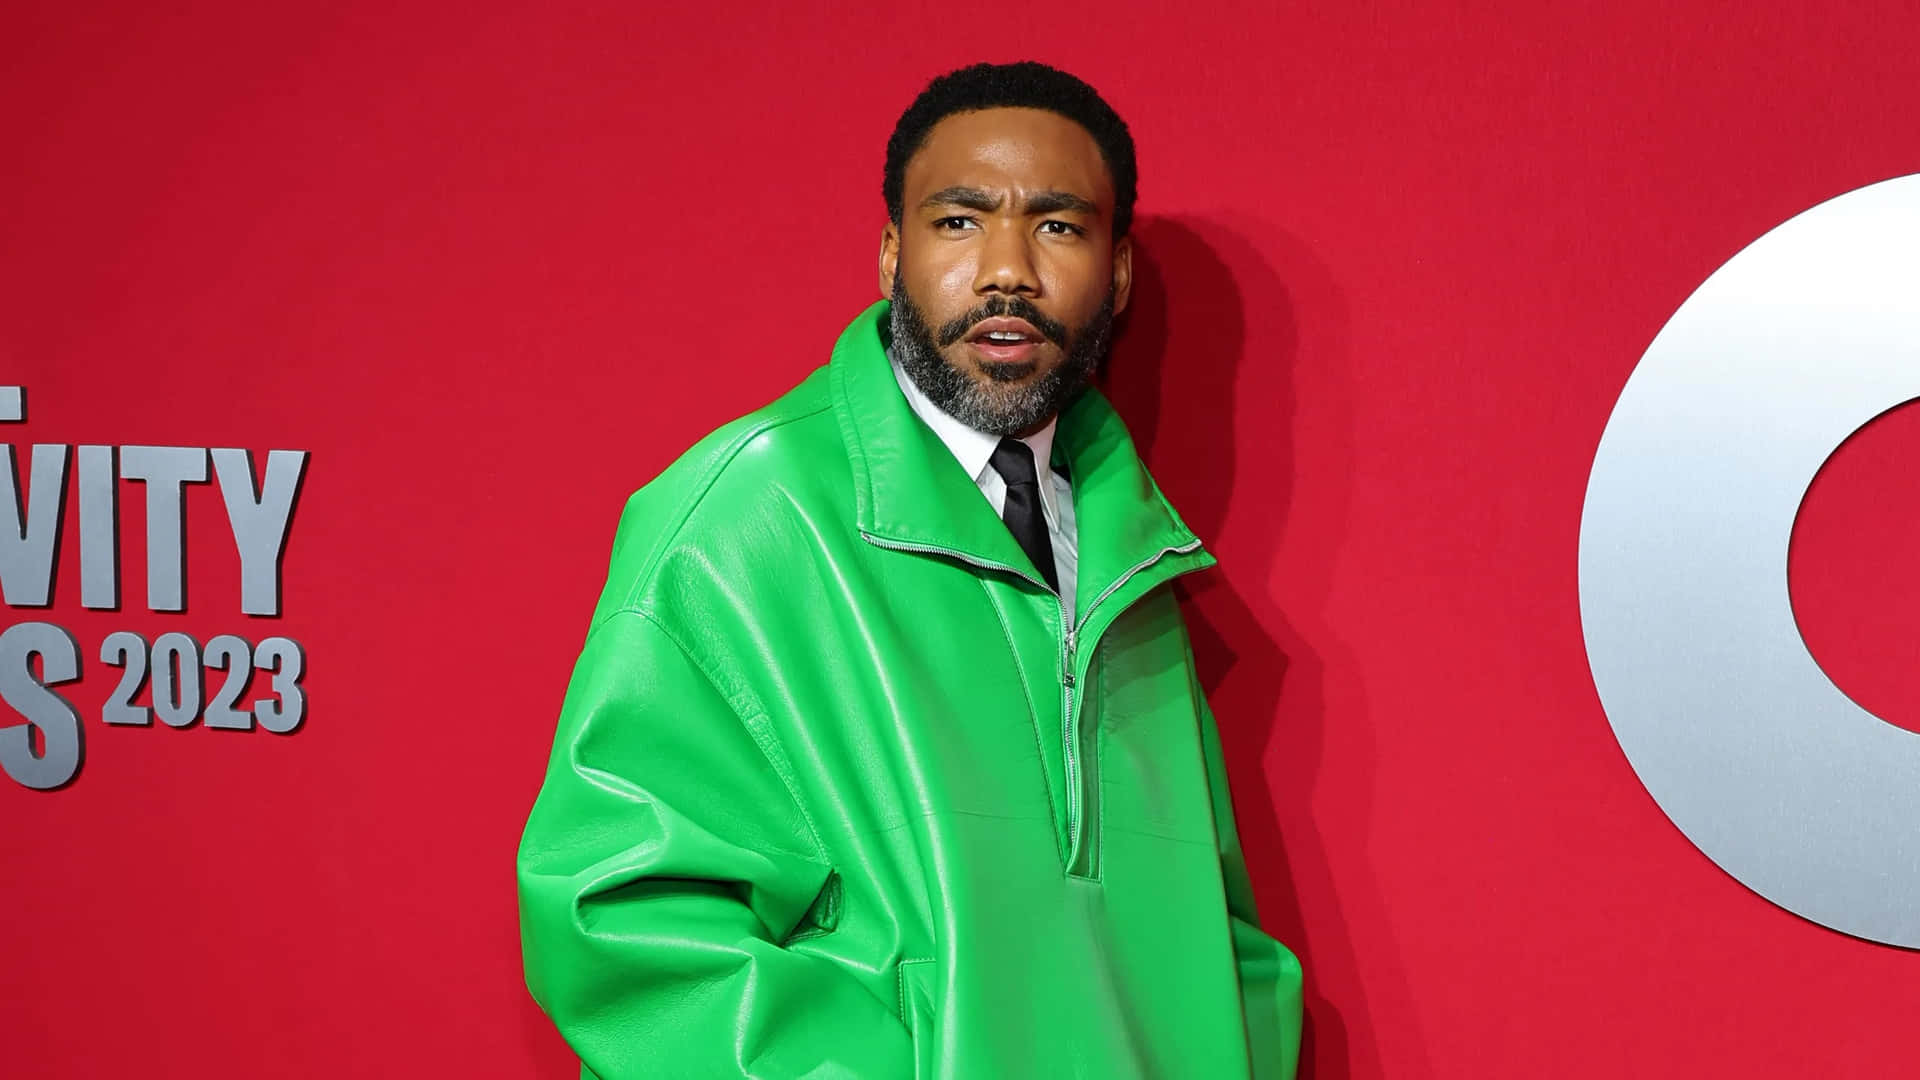 Donald Glover Green Jacket Red Background2023 Wallpaper